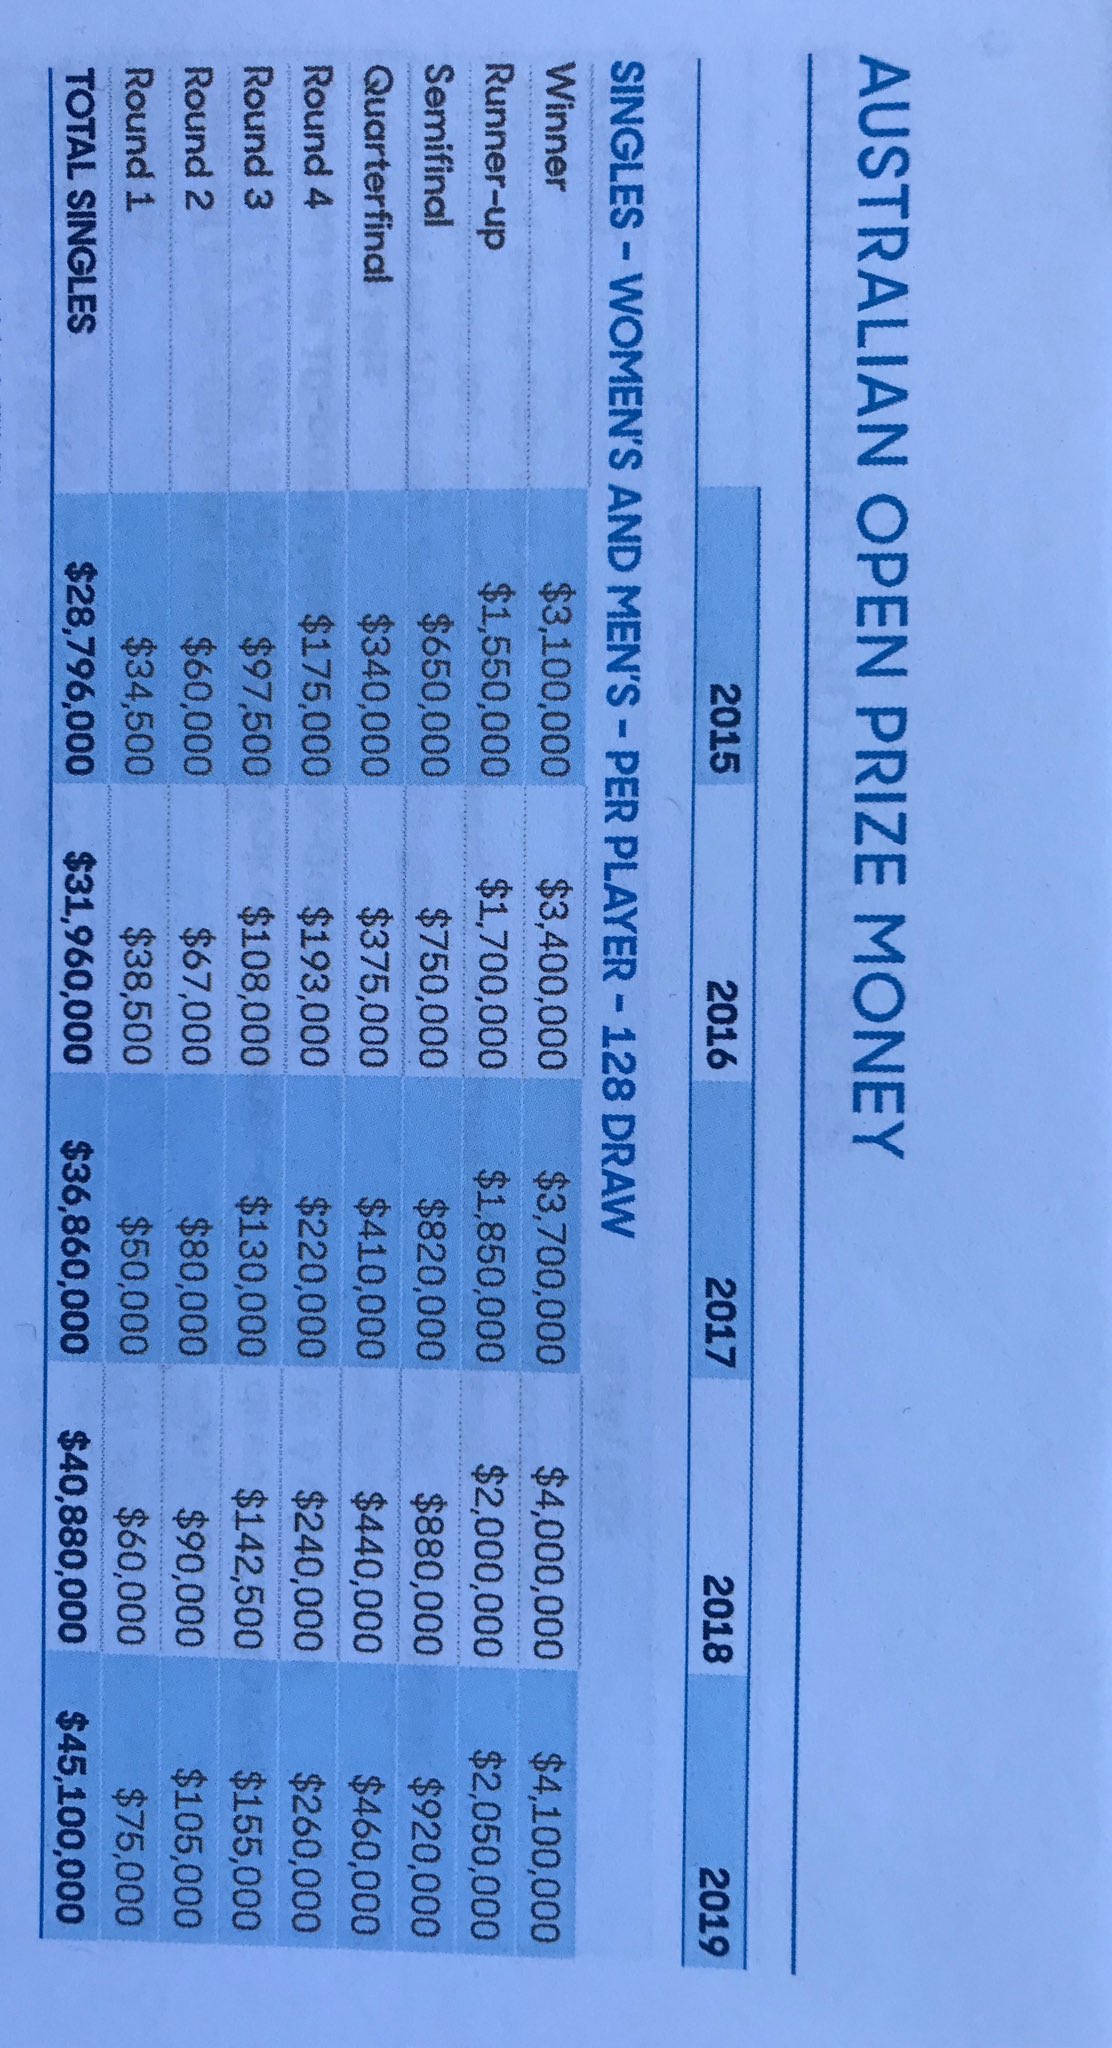 Nick Lester on Twitter: "A 5 year overview of the prize money increases at the ⁦@AustralianOpen⁩ / Twitter